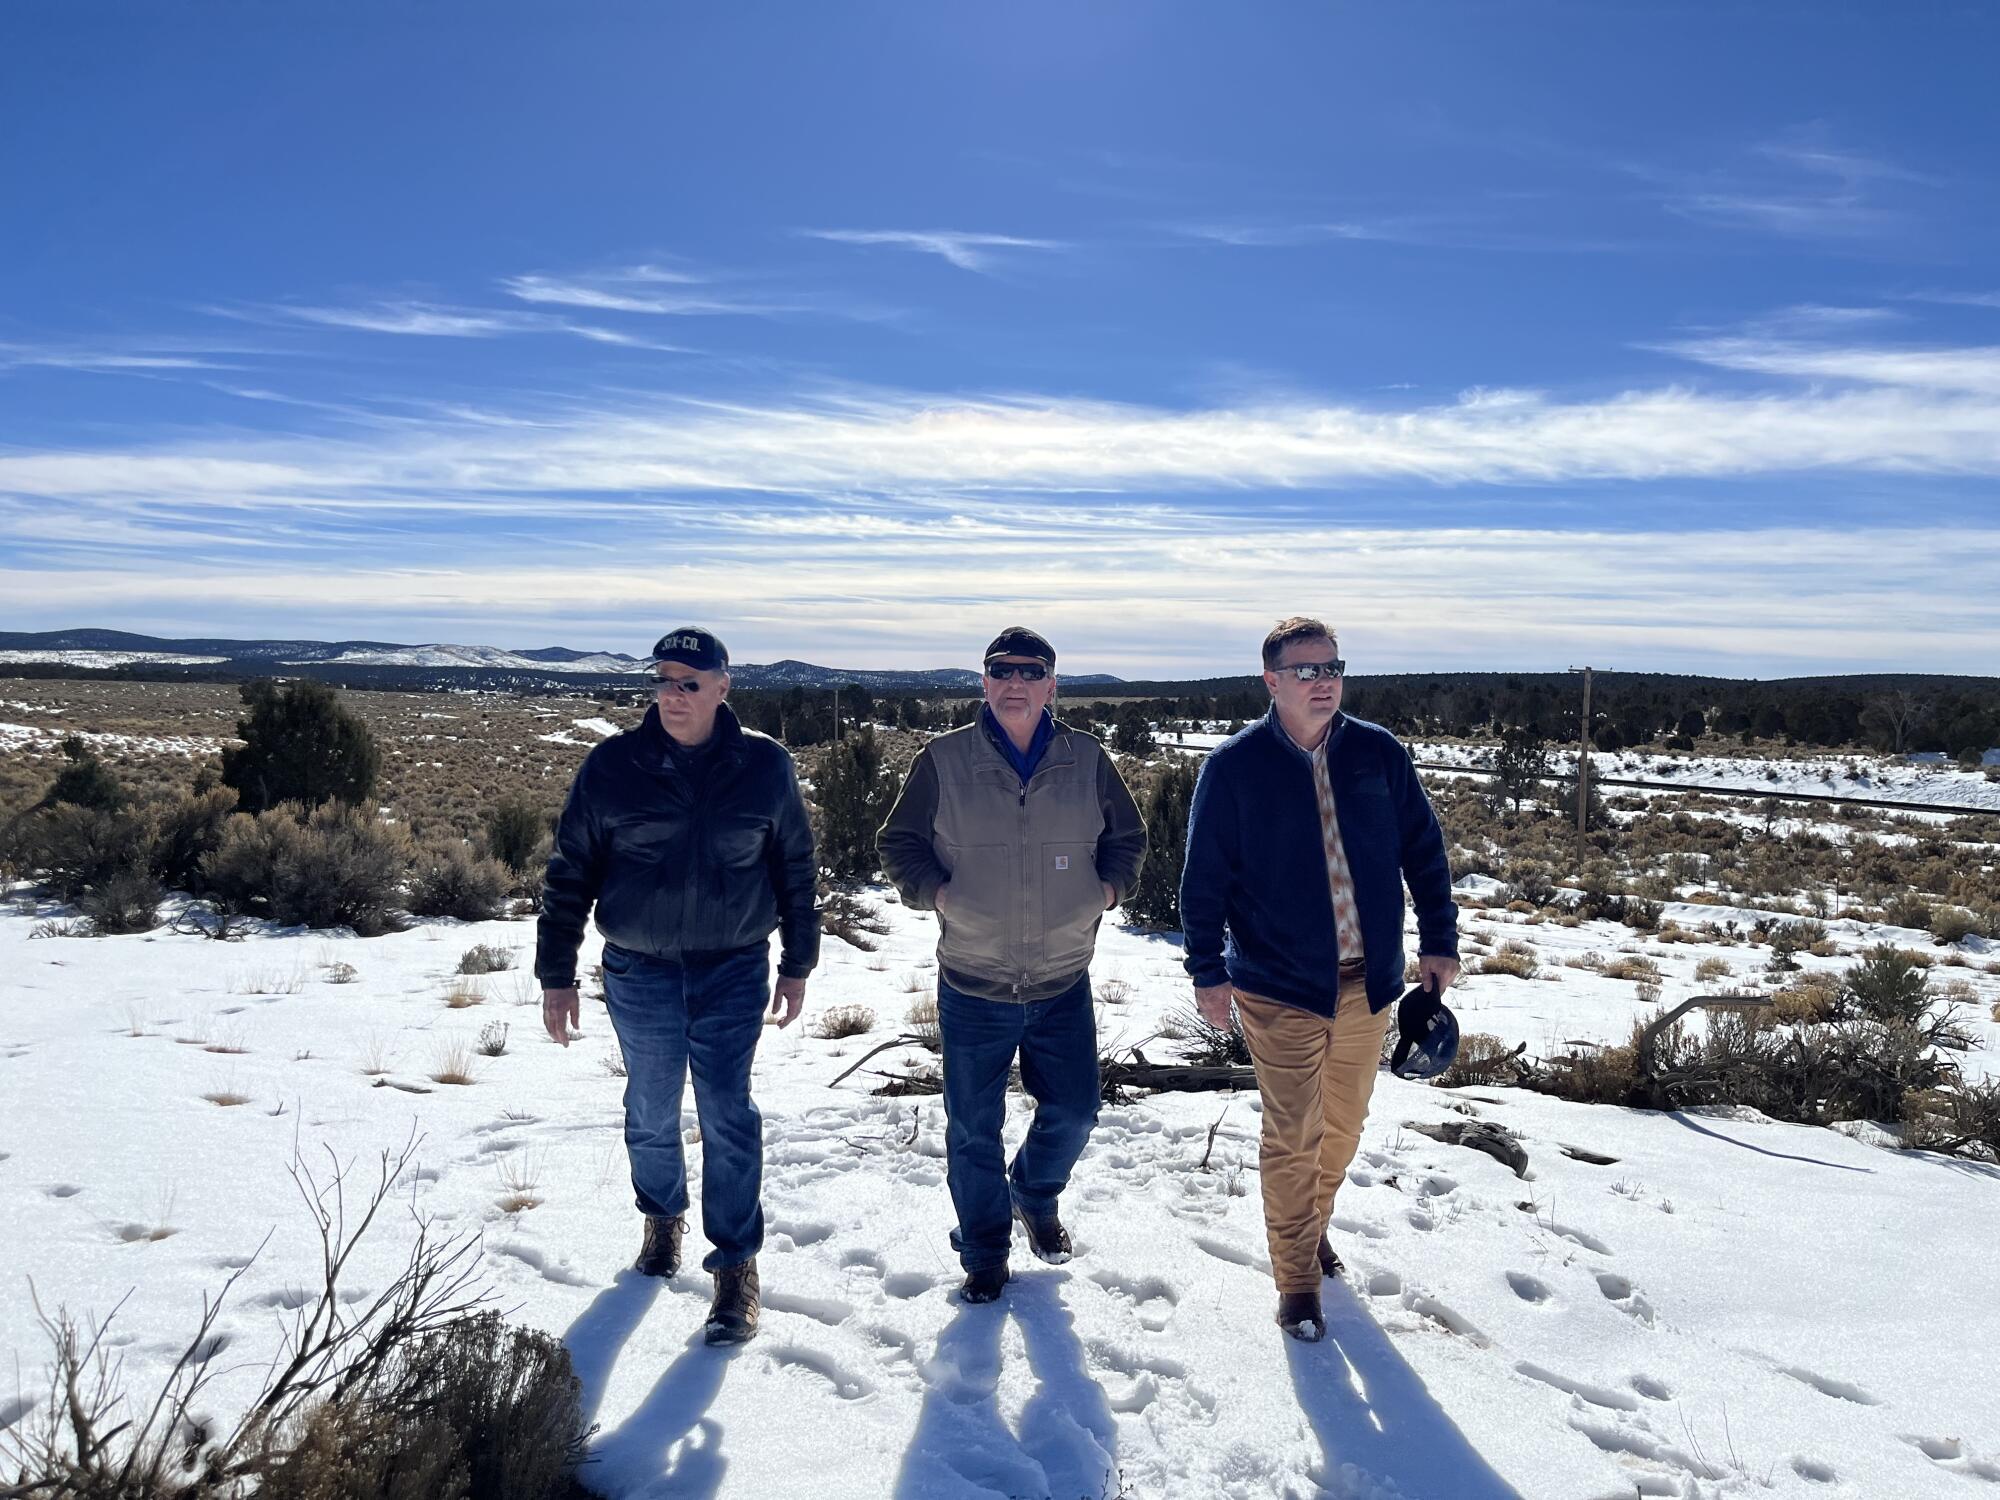 Three men walk in the proposed biofuel project site surrounded by 1.3 million acres of pinyon-juniper forest